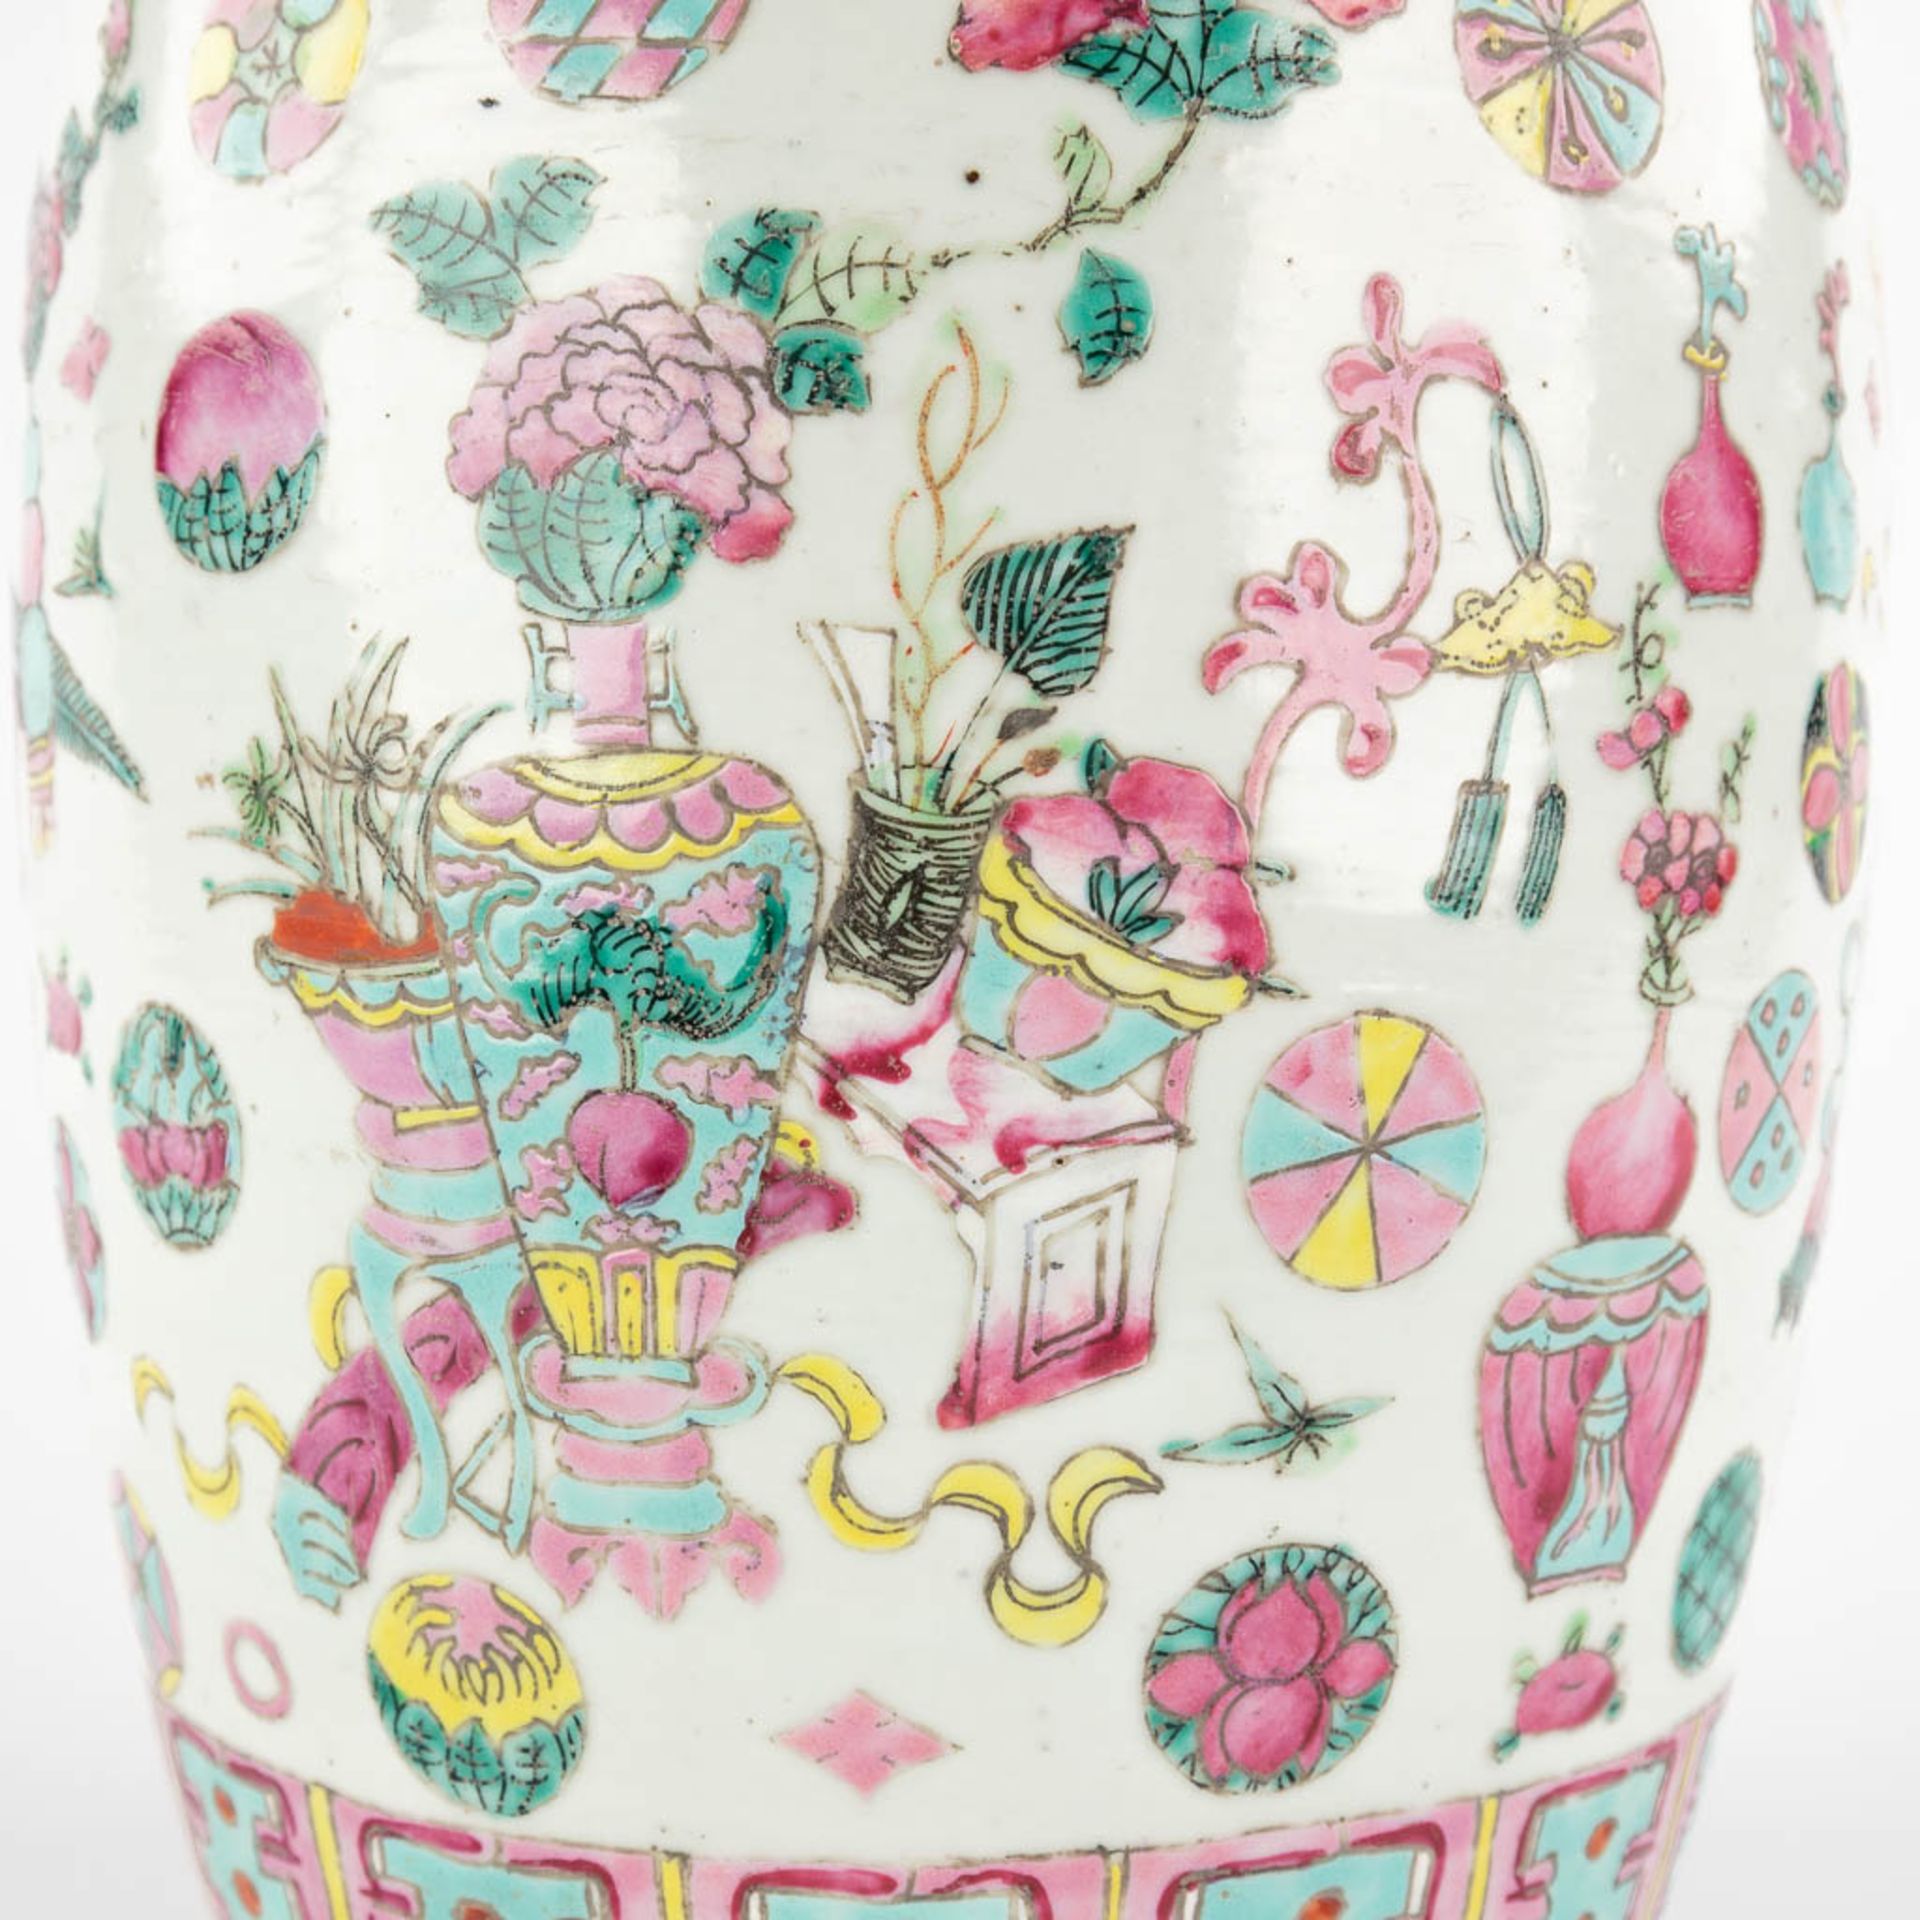 A Chinese vase with a decor of antiquities. 19th/20th C. (H:44 x D:21 cm) - Image 10 of 11